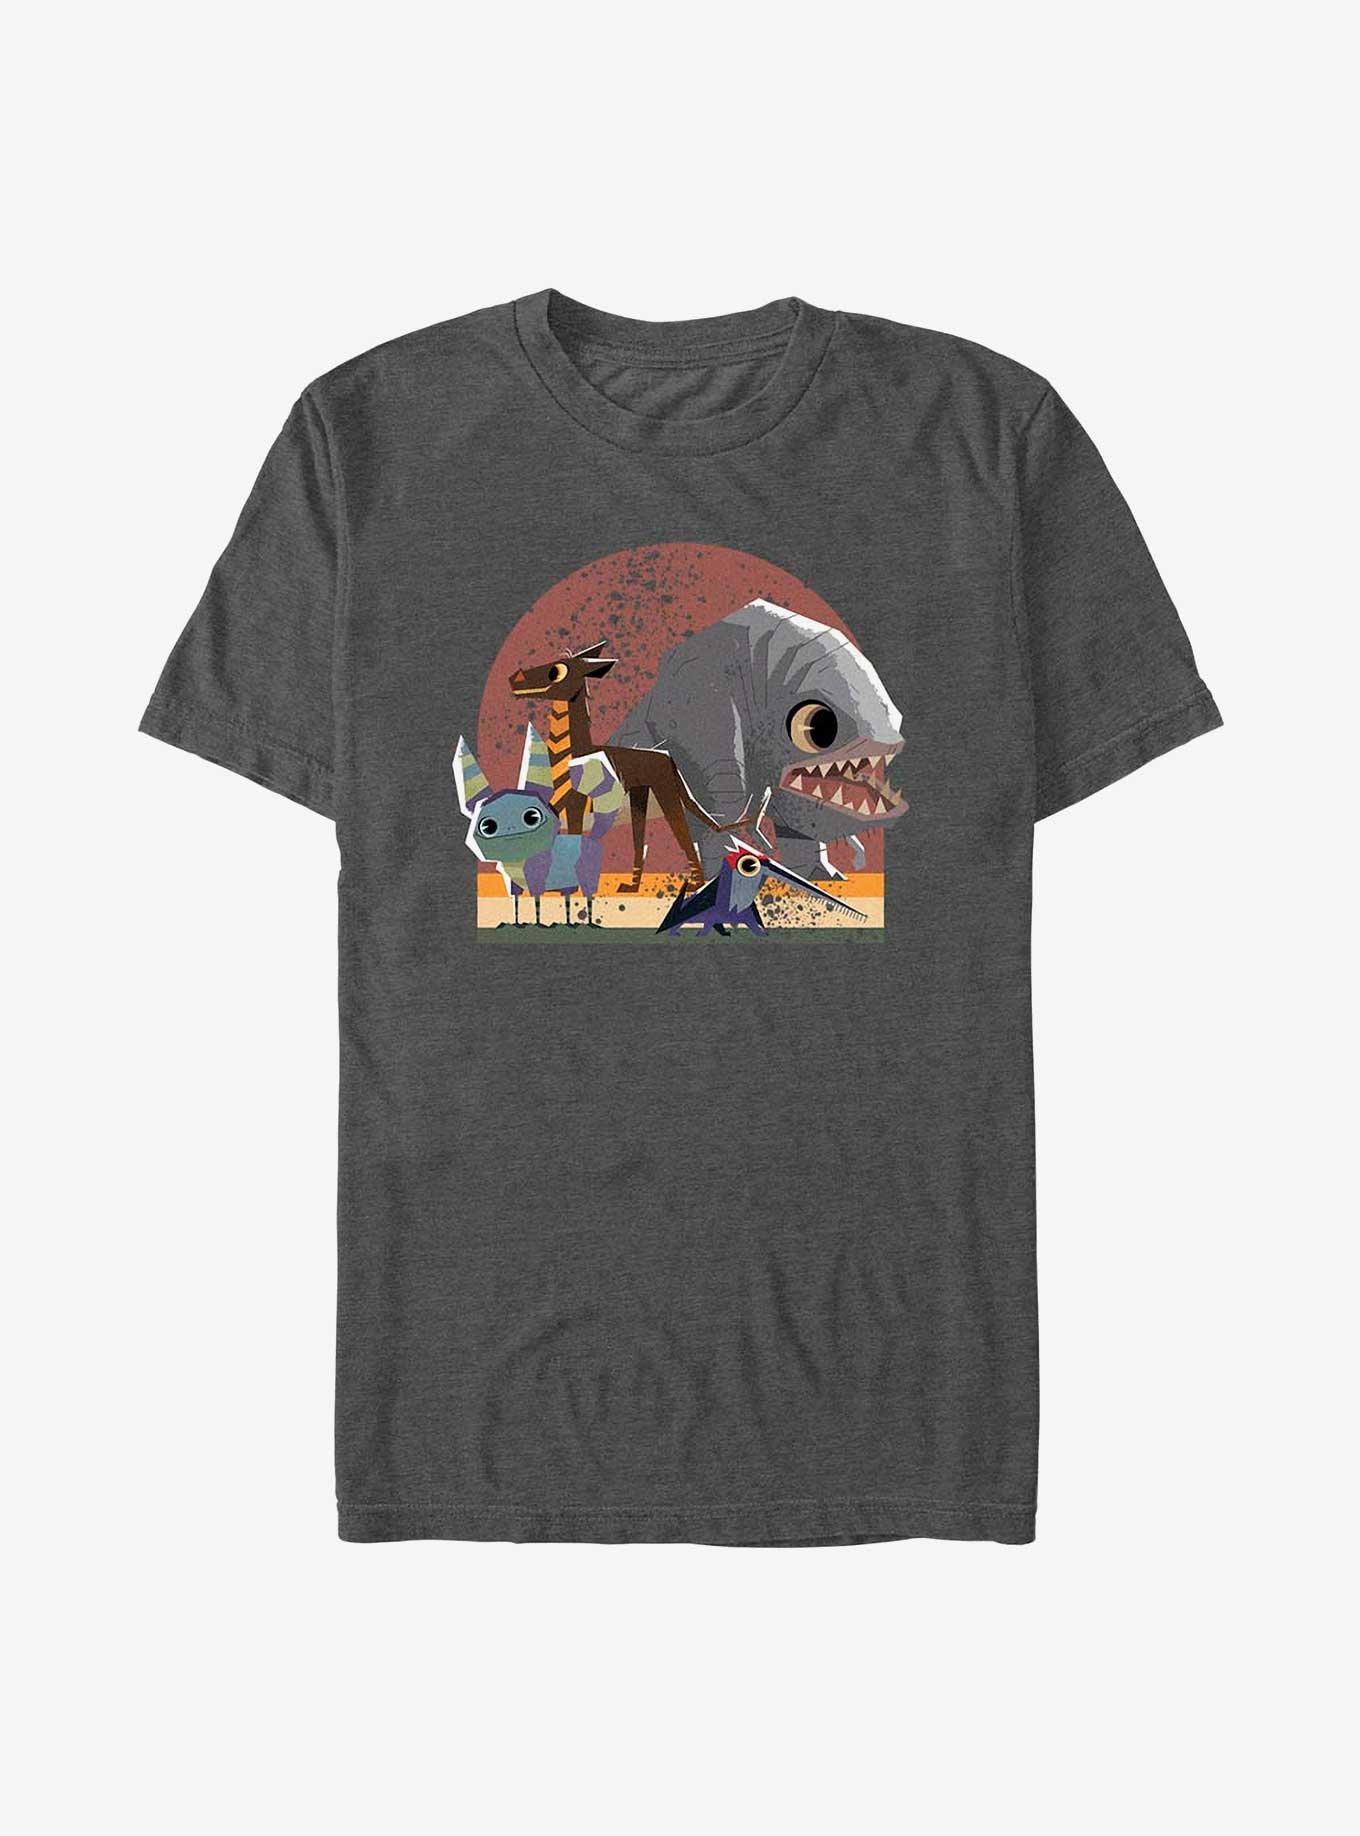 Star Wars: Galaxy Of Creatures Creature Group T-Shirt